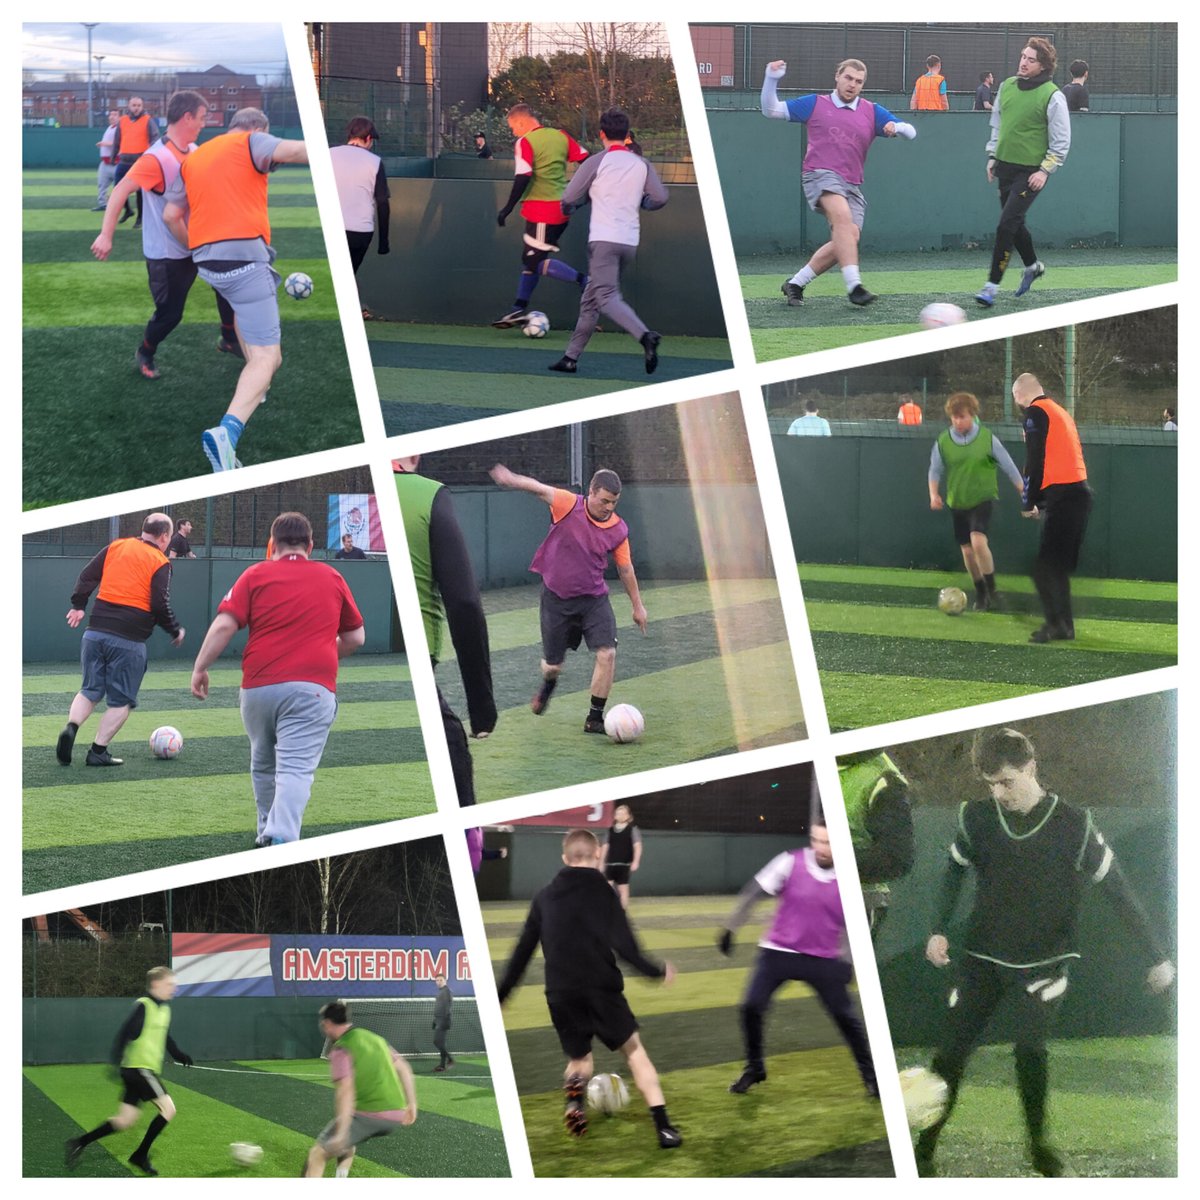 So far this year we've had 107 individuals involved in our 5-a-side kickabout sessions, with 17 new faces included. We are appealing to the local business community for support. Could your organisation sponsor 1 or more of our weekly sessions? #MentalHealthMatters